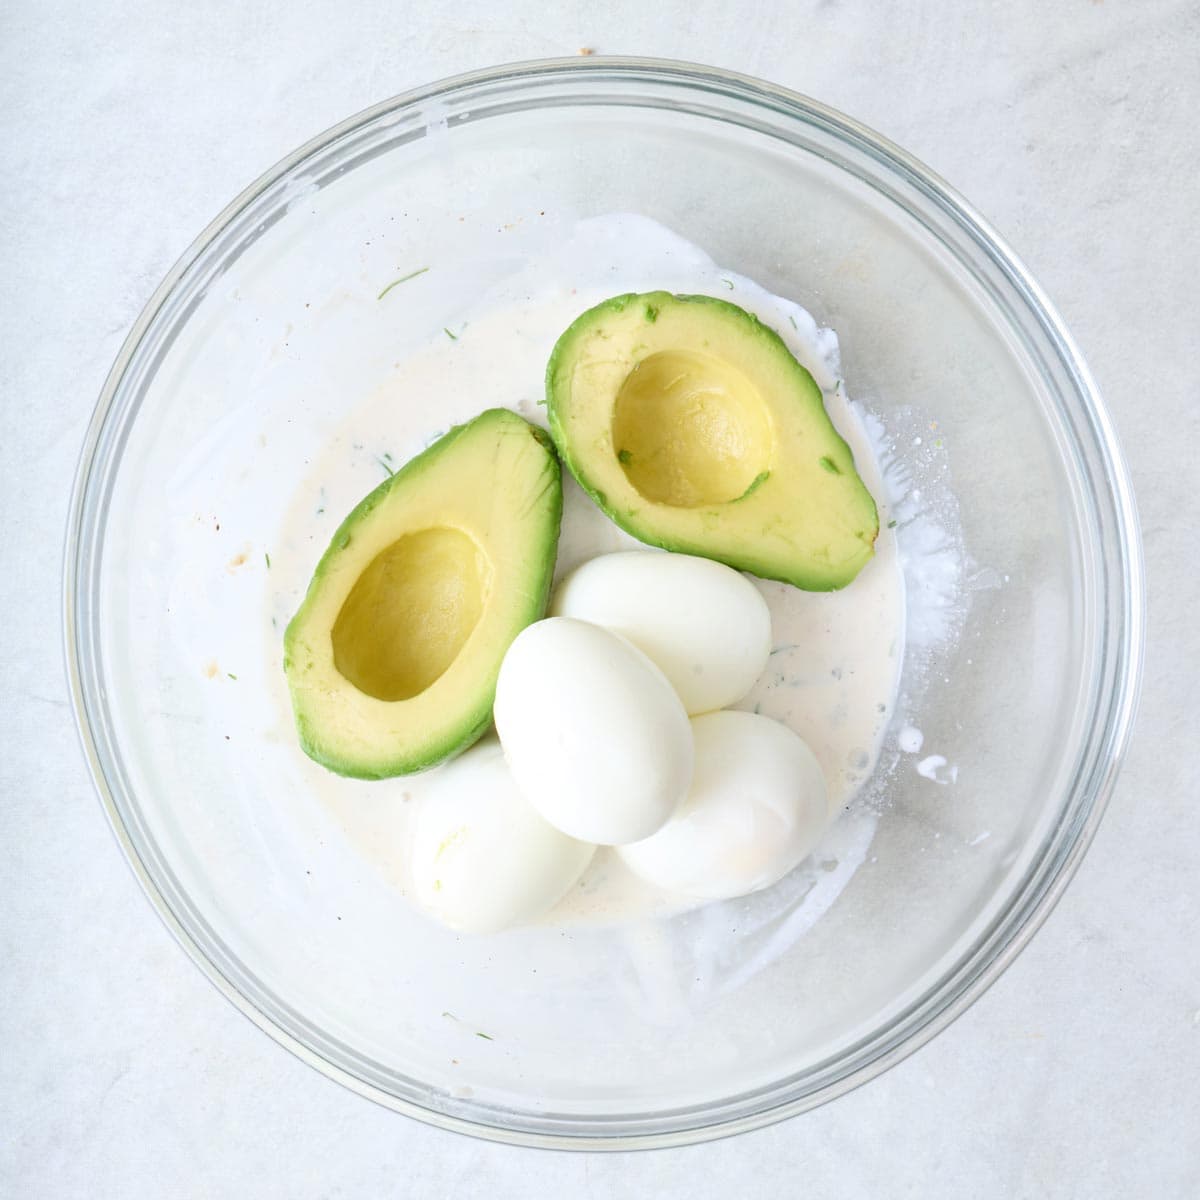 Dressing after mixing with a halved avocado and boiled eggs added on top.